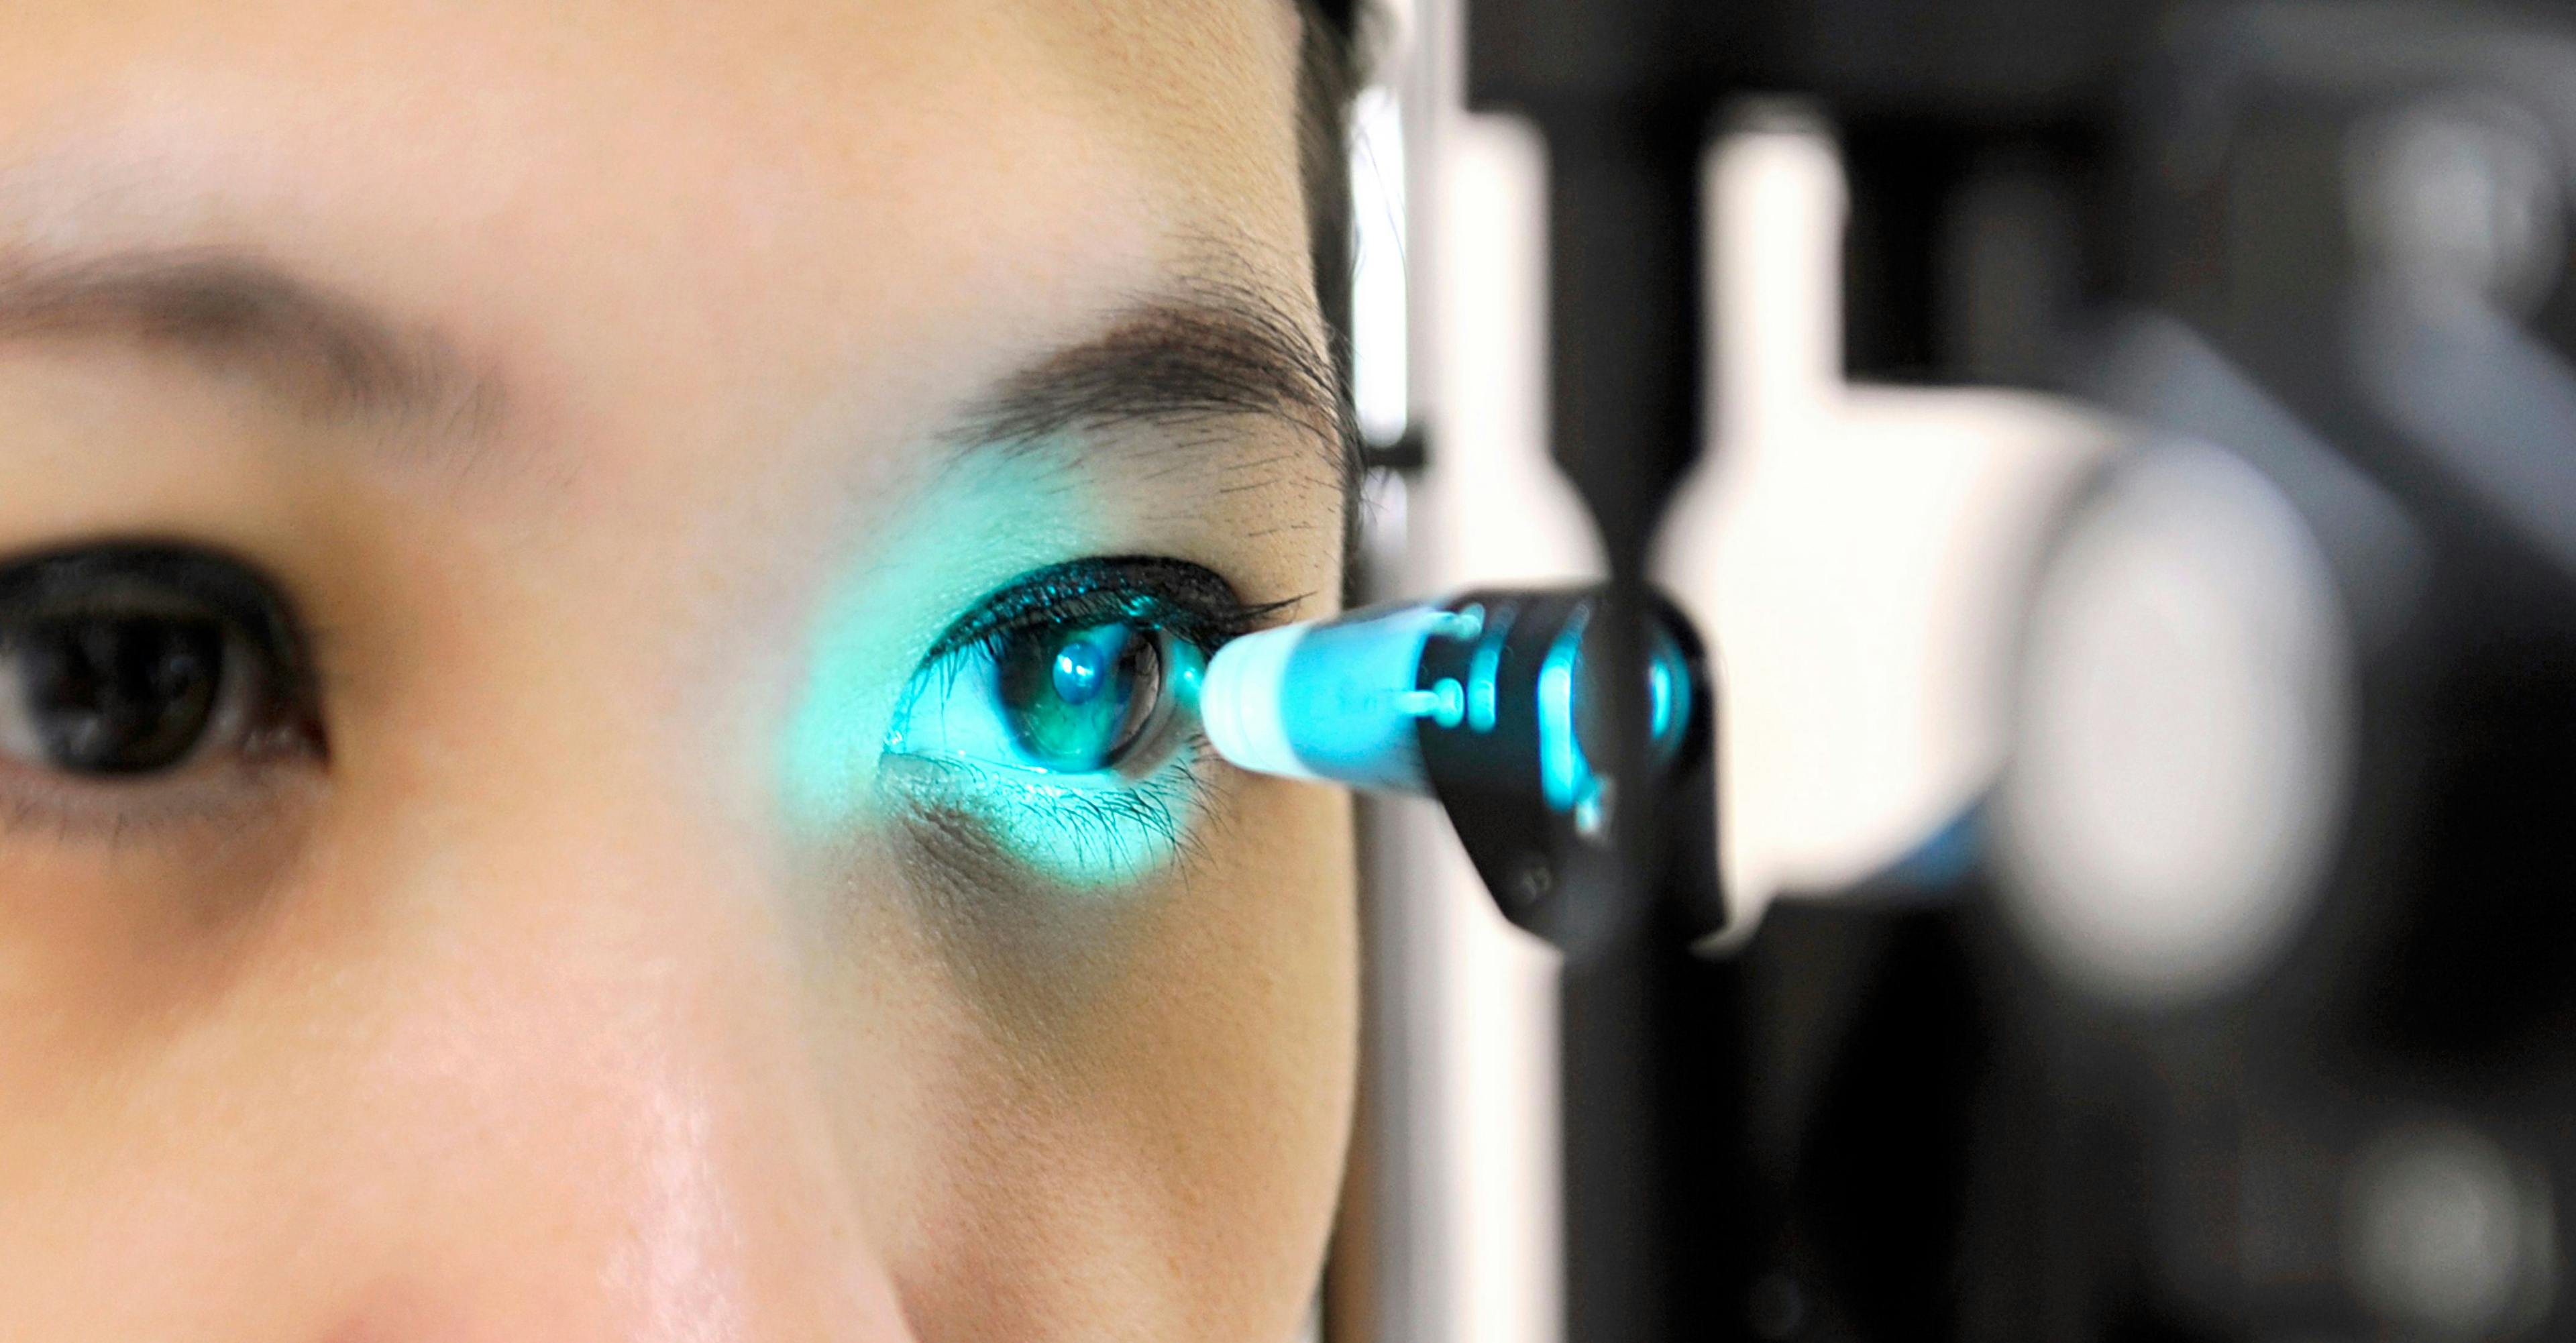 The company’s OCT-guided femtosecond laser technology is designed to perform the first femtosecond laser, image-guided, high-precision trabeculotomy (FLigHT) procedure for the treatment of primary open-angle glaucoma (POAG).